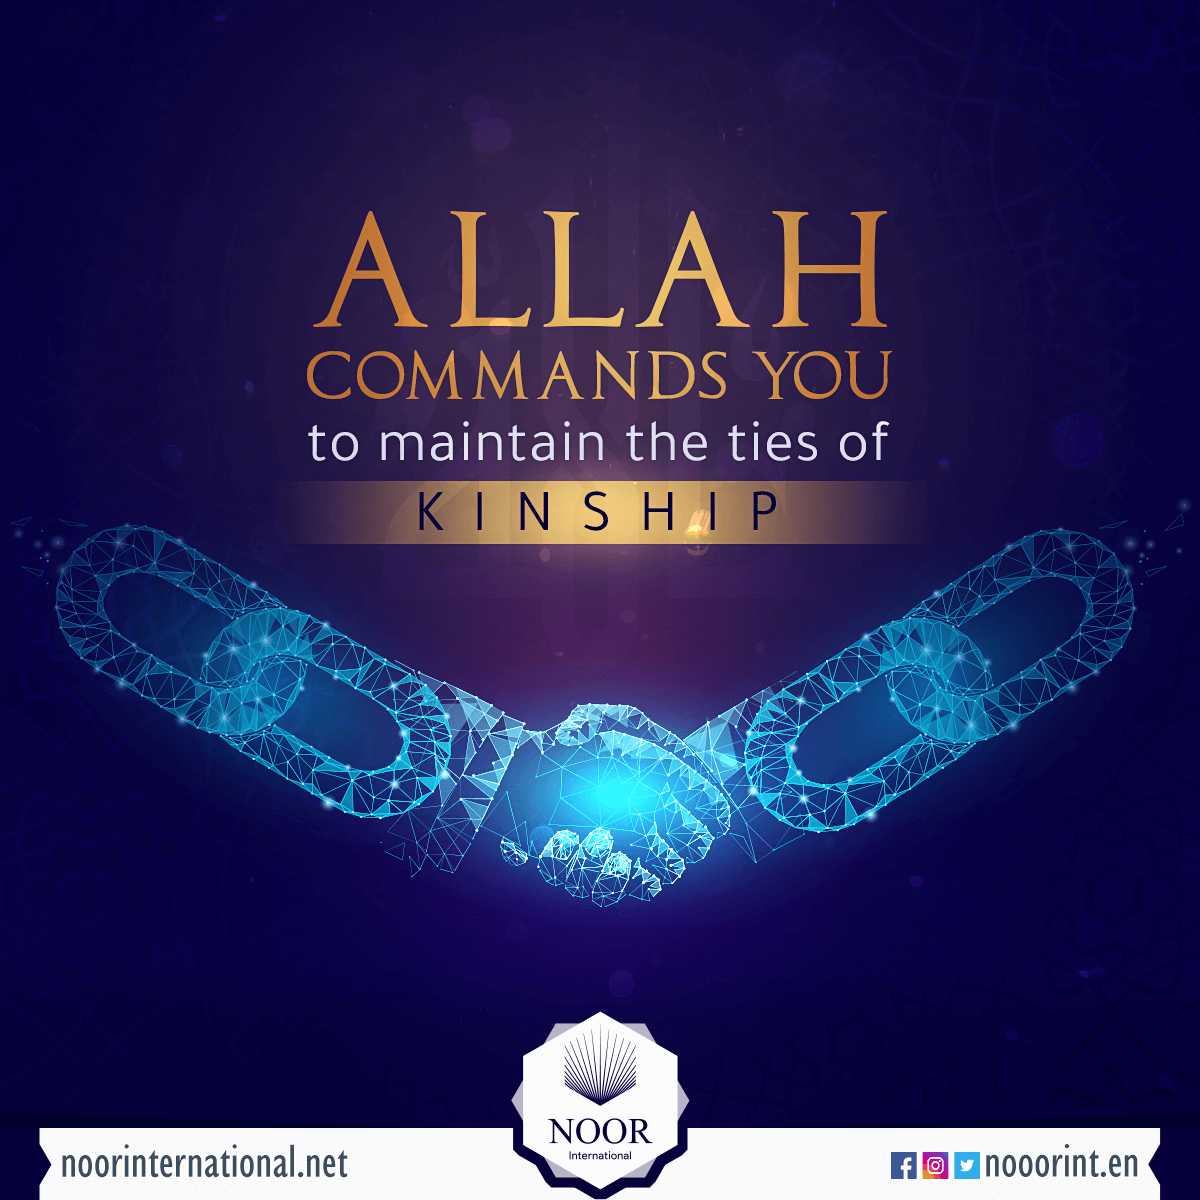 Allah commands you to maintain the ties of kinship